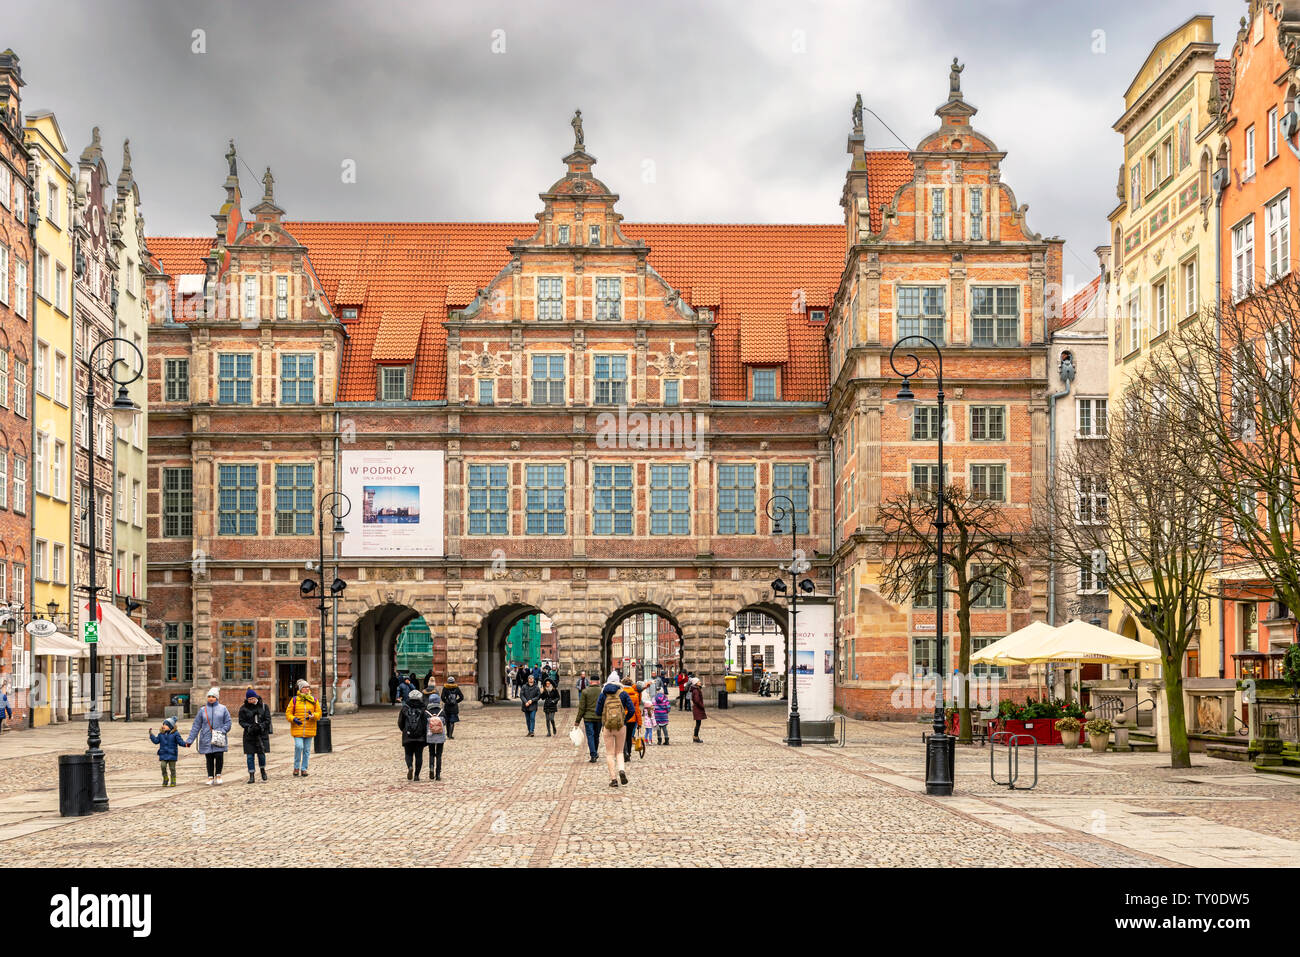 Gadansk, Poland - Feb 14, 2019: View at the Green gate from the Long square the main street in the old town of Gdansk Poland. Stock Photo